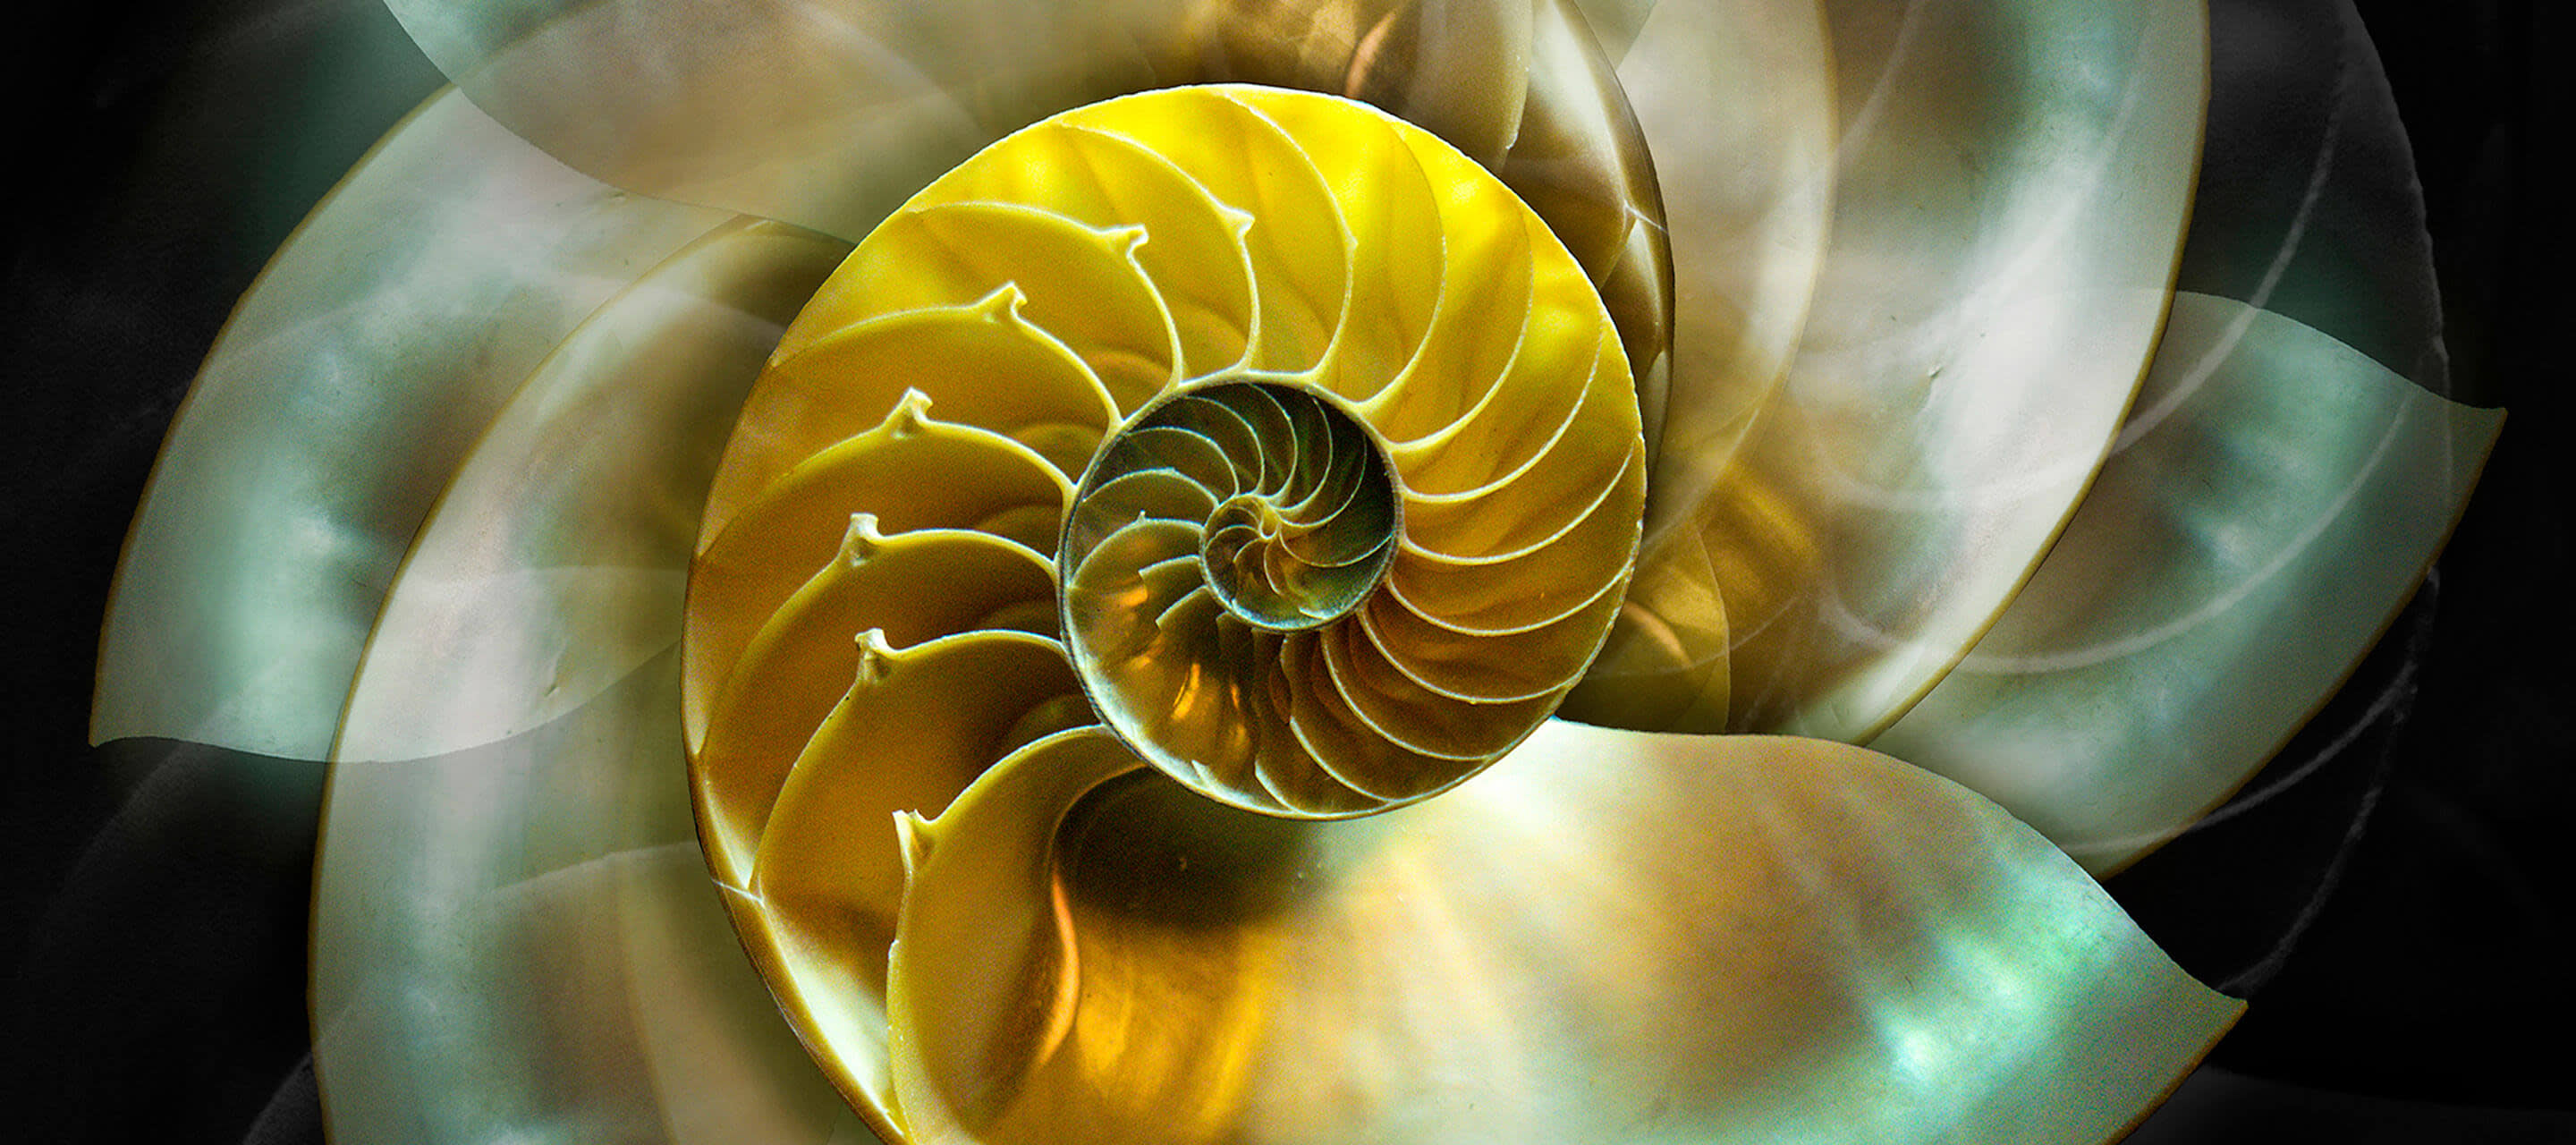  image of a nautilus shell abstract